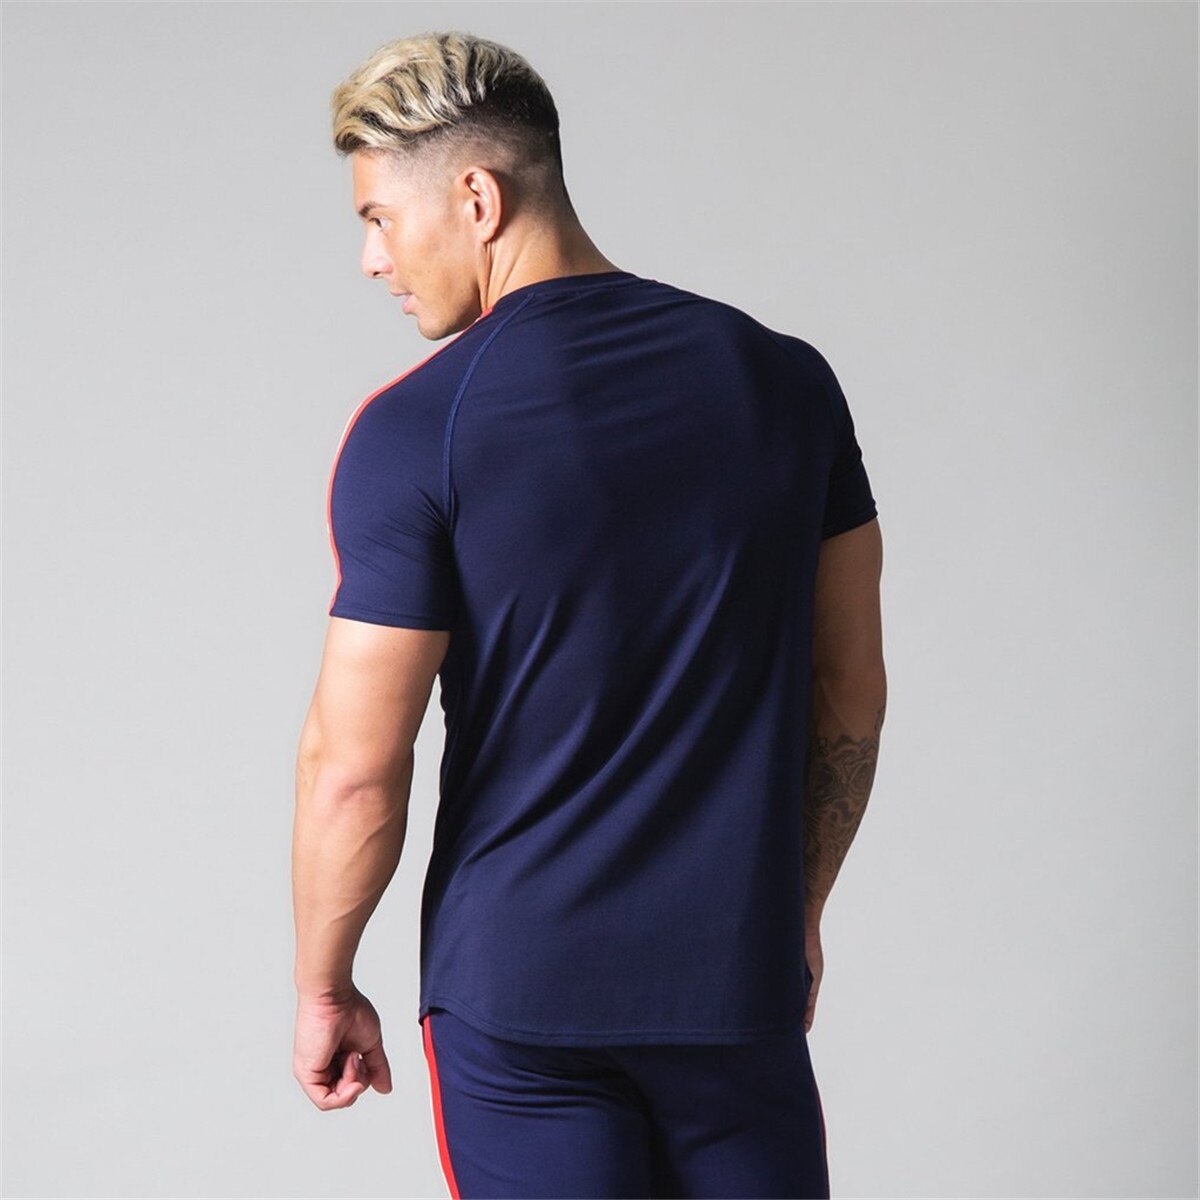 Gym Skinny T-shirt Men Cotton Casual Short Sleeve Shirt Male Bodybuilding Sport Tees Tops Summer Fitness Workout Clothing